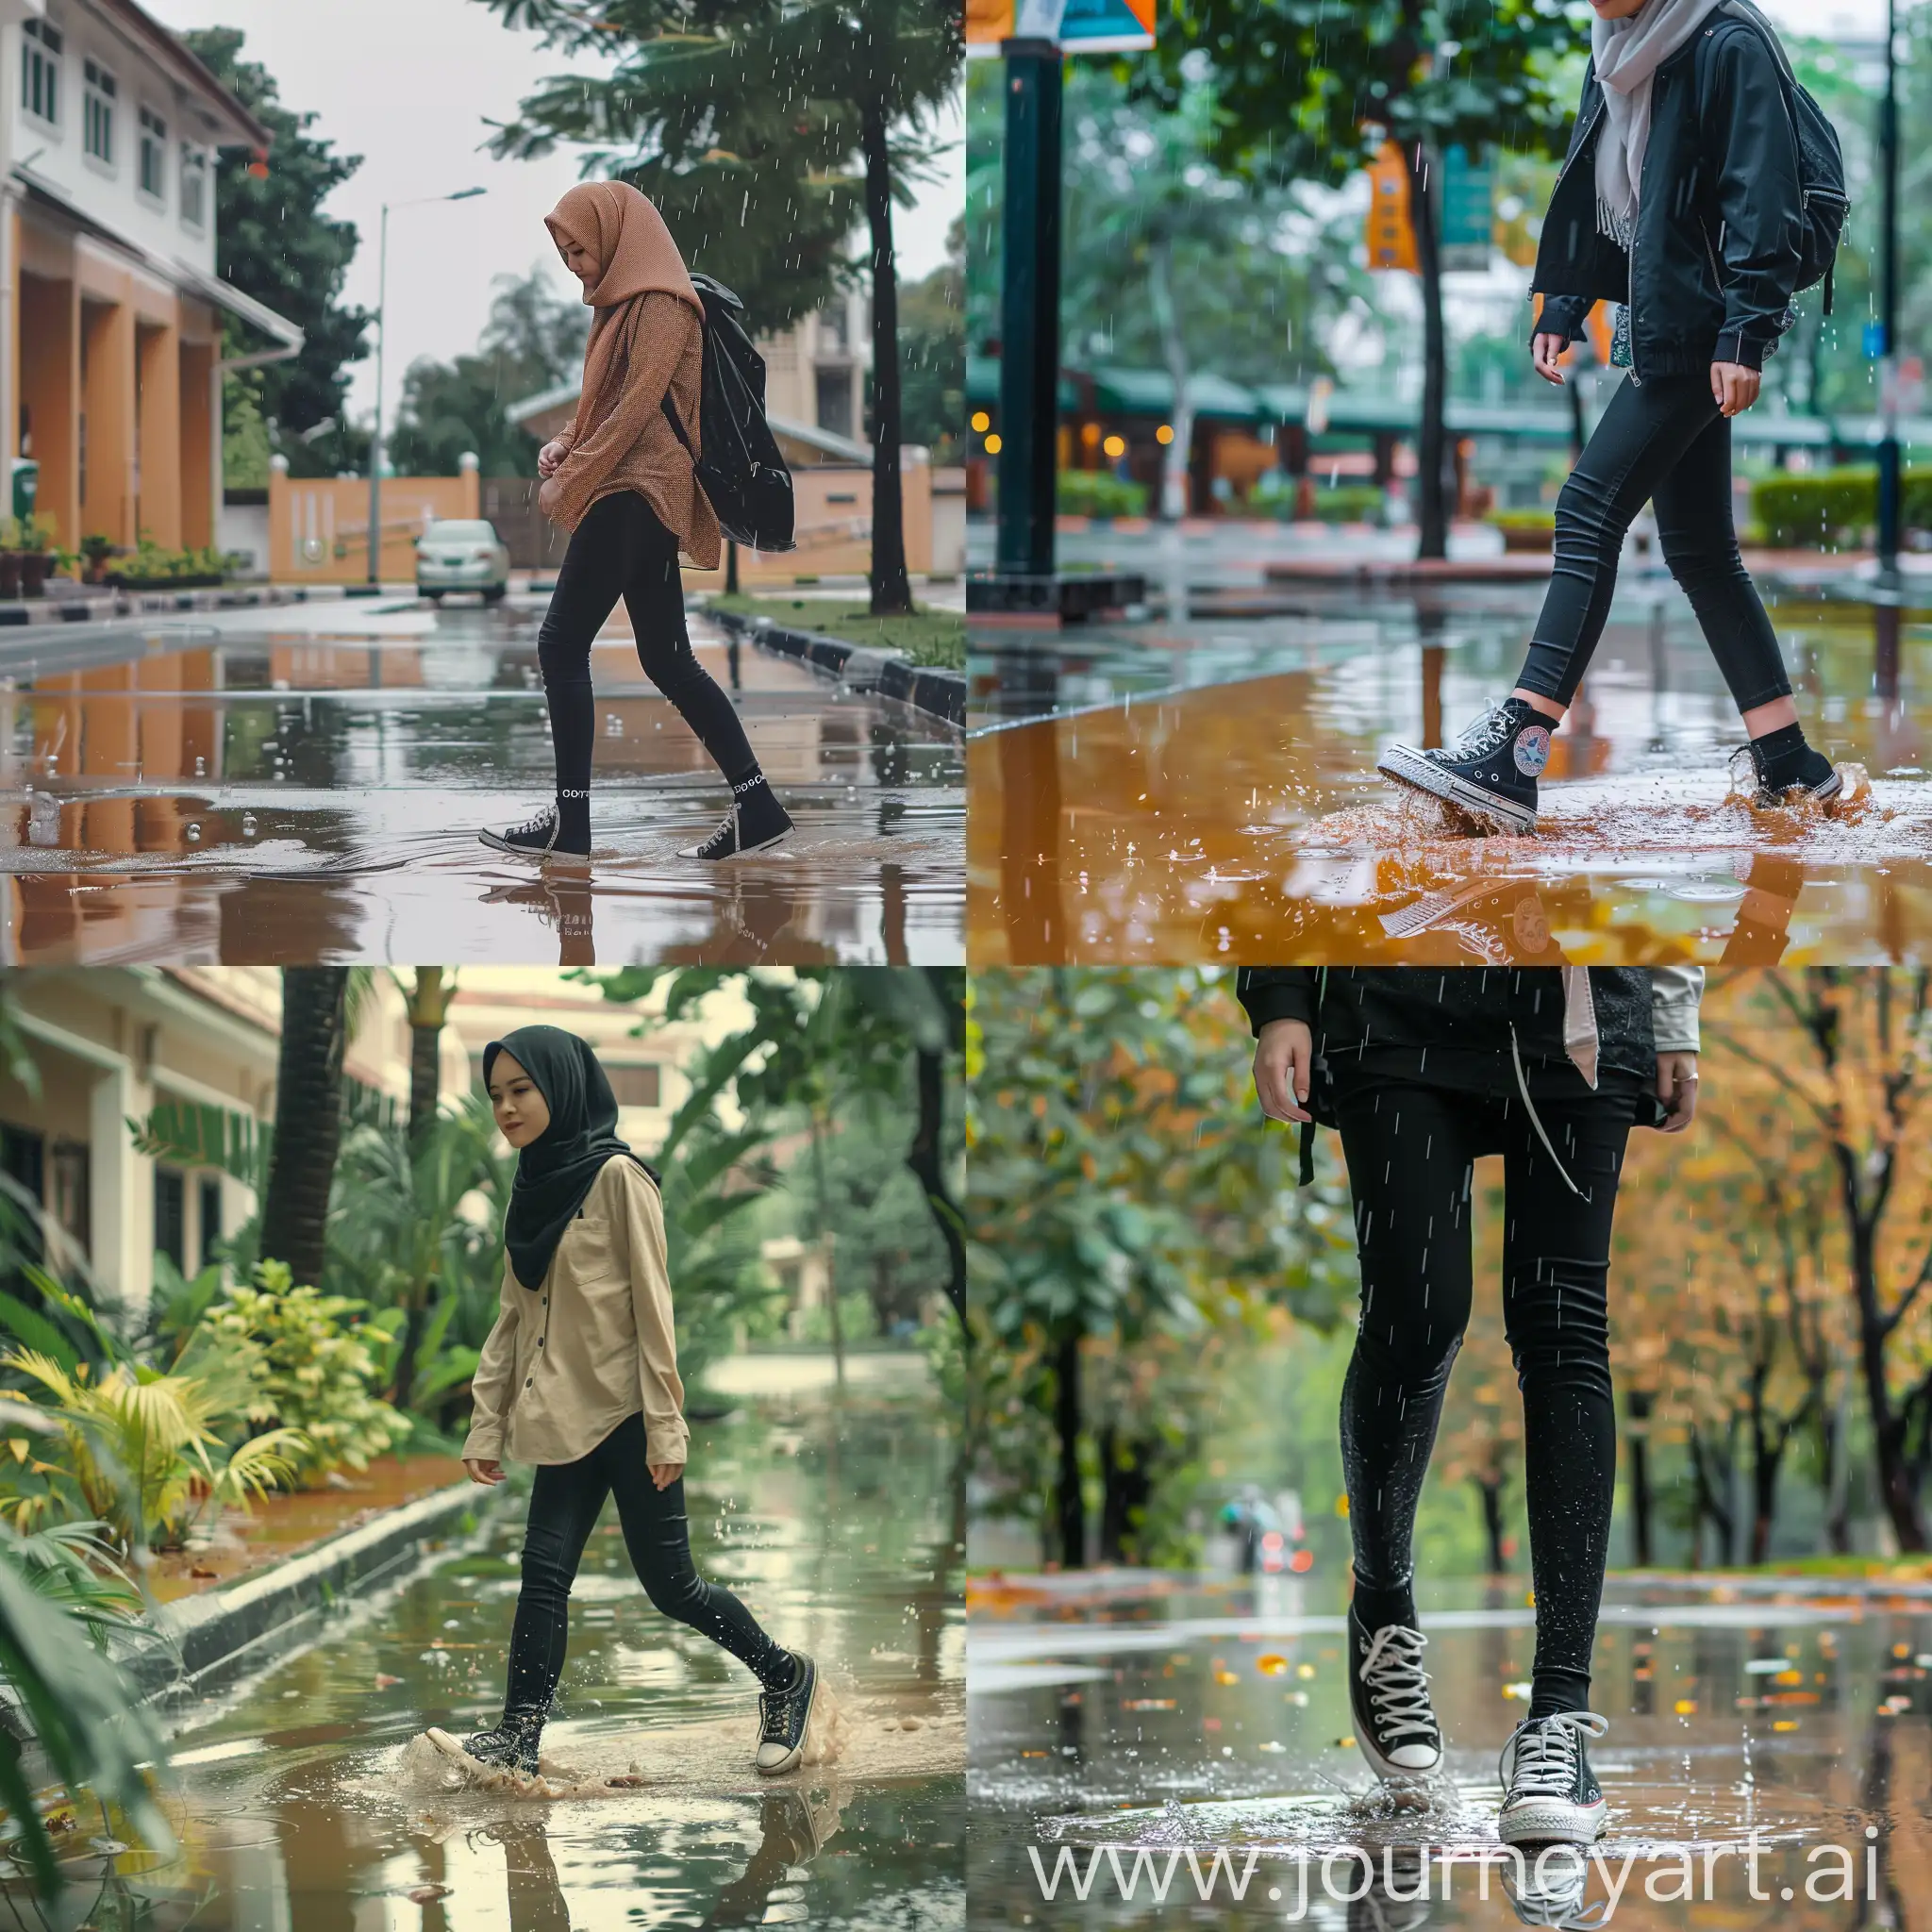 A beautiful malaysian hijab girl wearing casual clothes, black skinny pants, black converse and black socks walking and getting full drenched in heavy rain and also stepping into rain puddles.